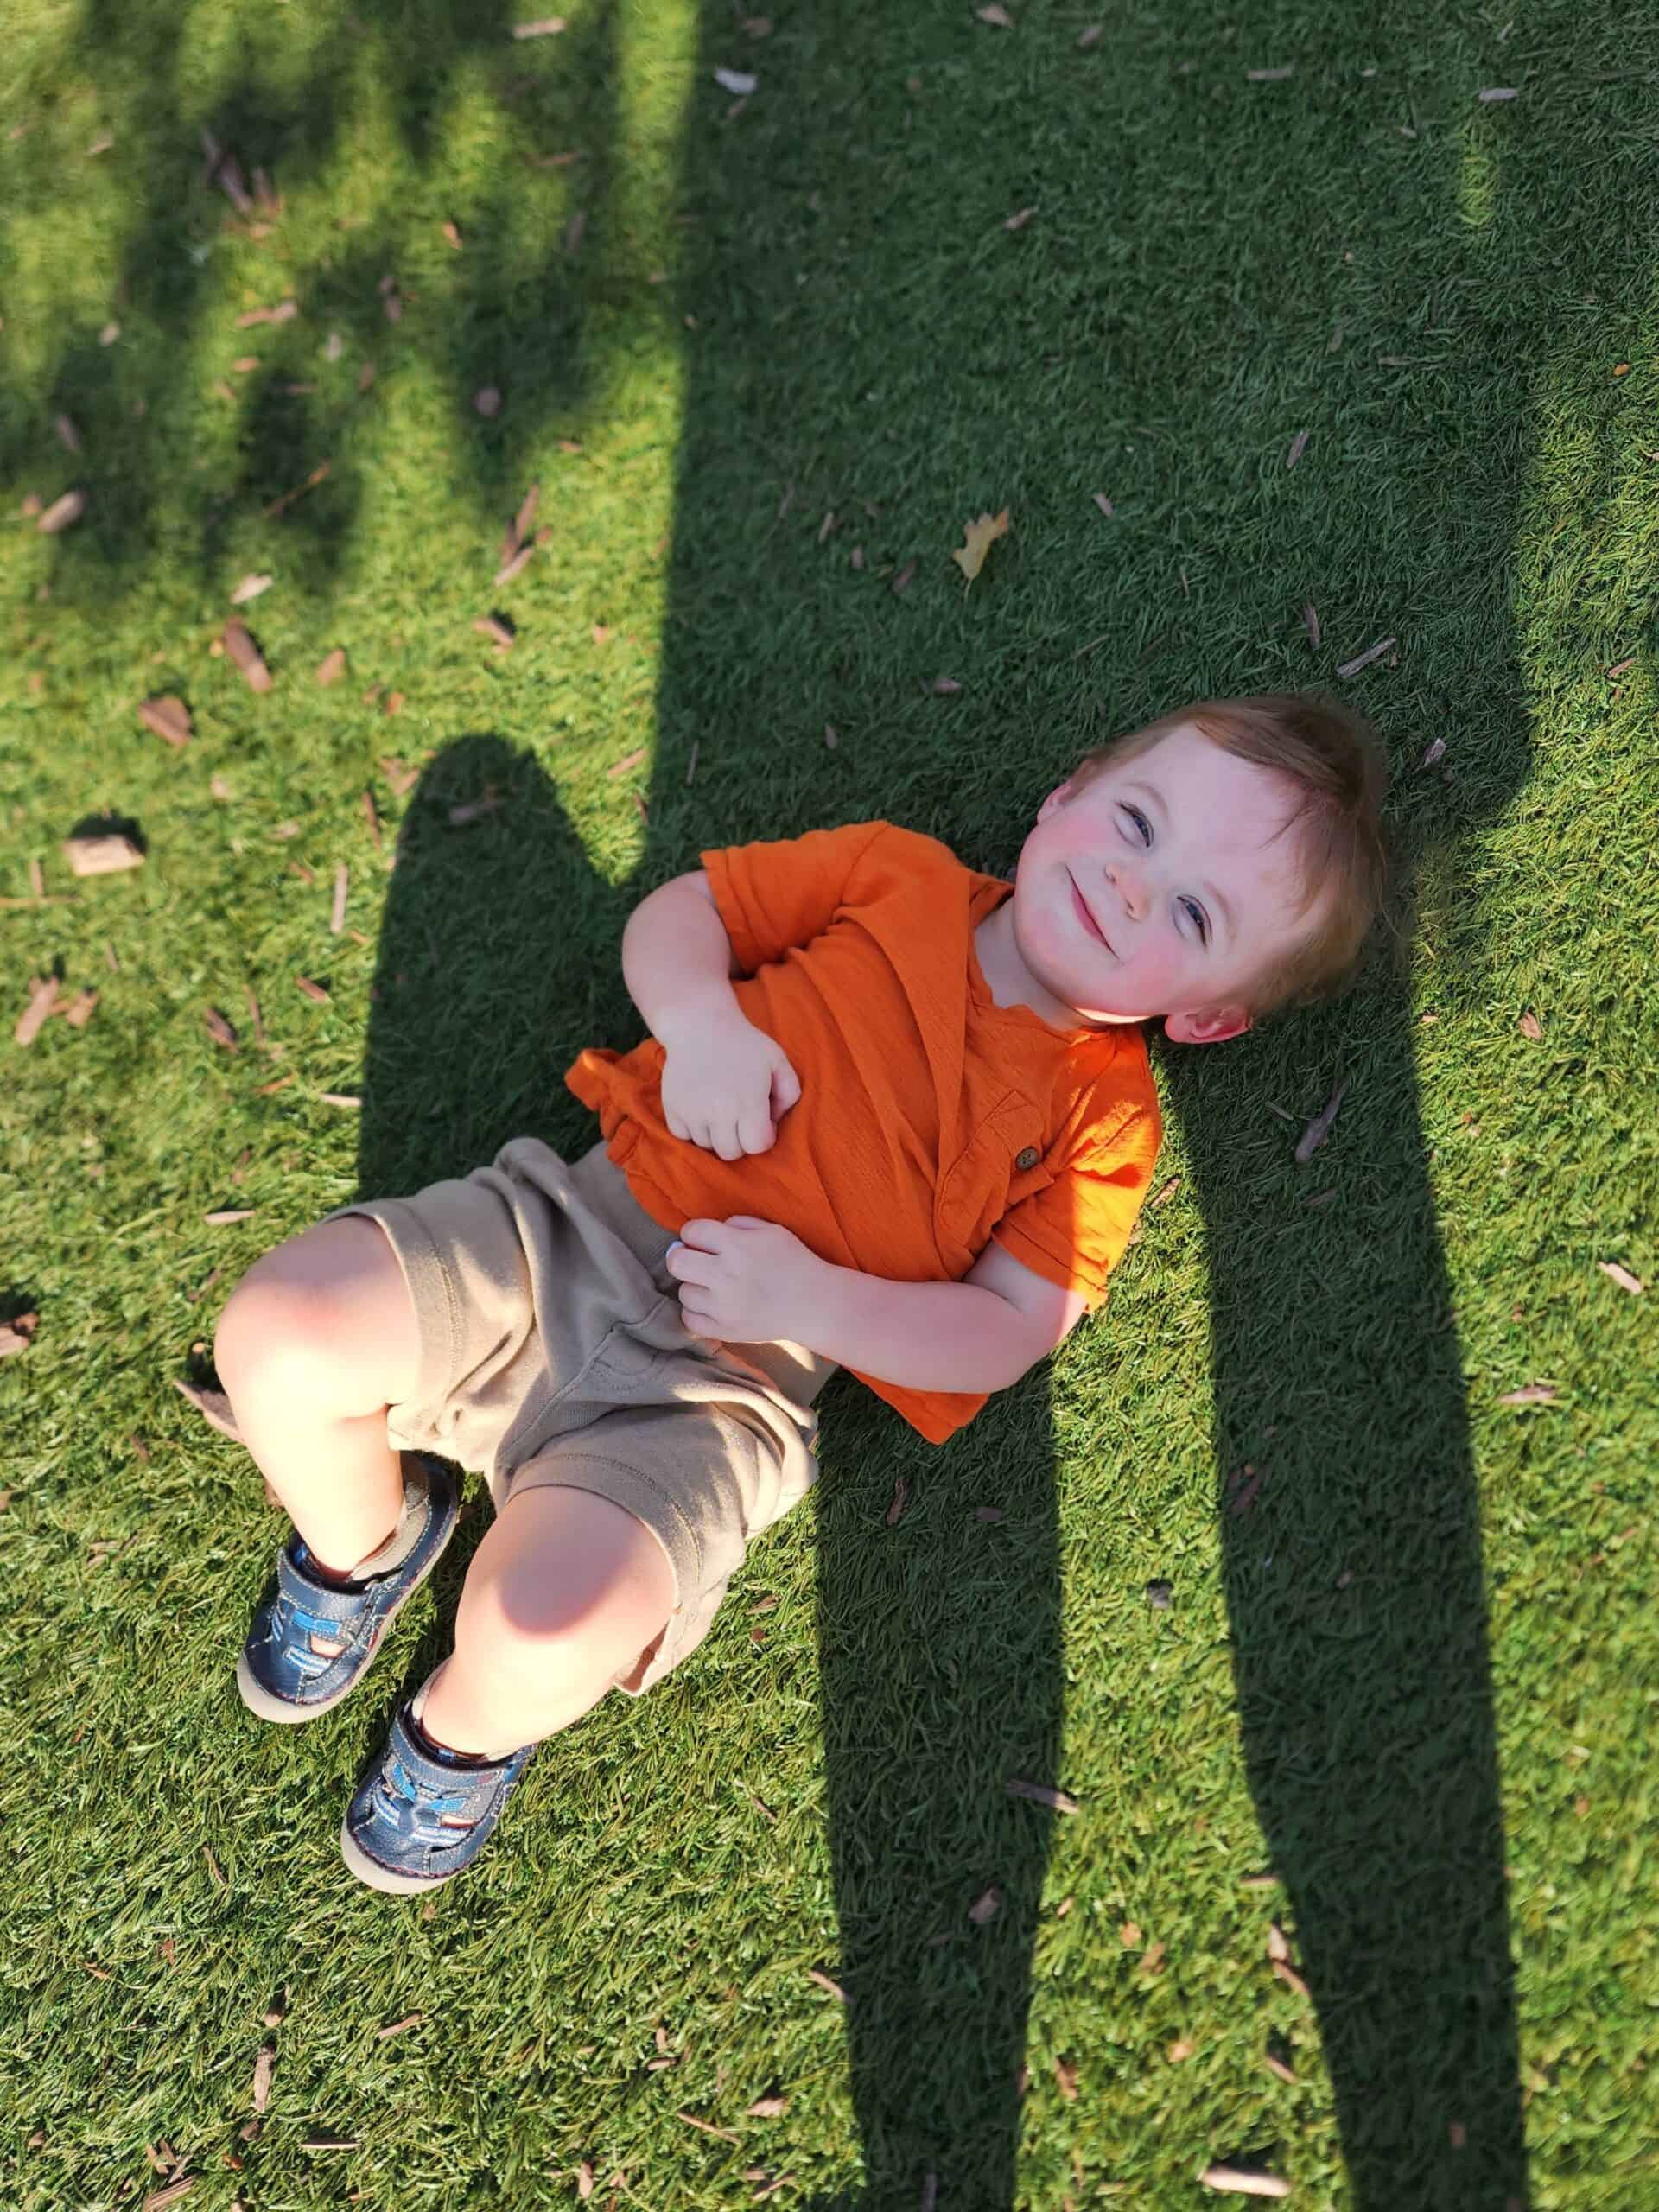 A young child with a beaming smile lies on the grass, wearing an orange shirt and khaki shorts, enjoying the warm sunlight at Northwest Park, Morrisville, NC. The child's shadow stretches out on the grass, capturing a playful and relaxed moment outdoors